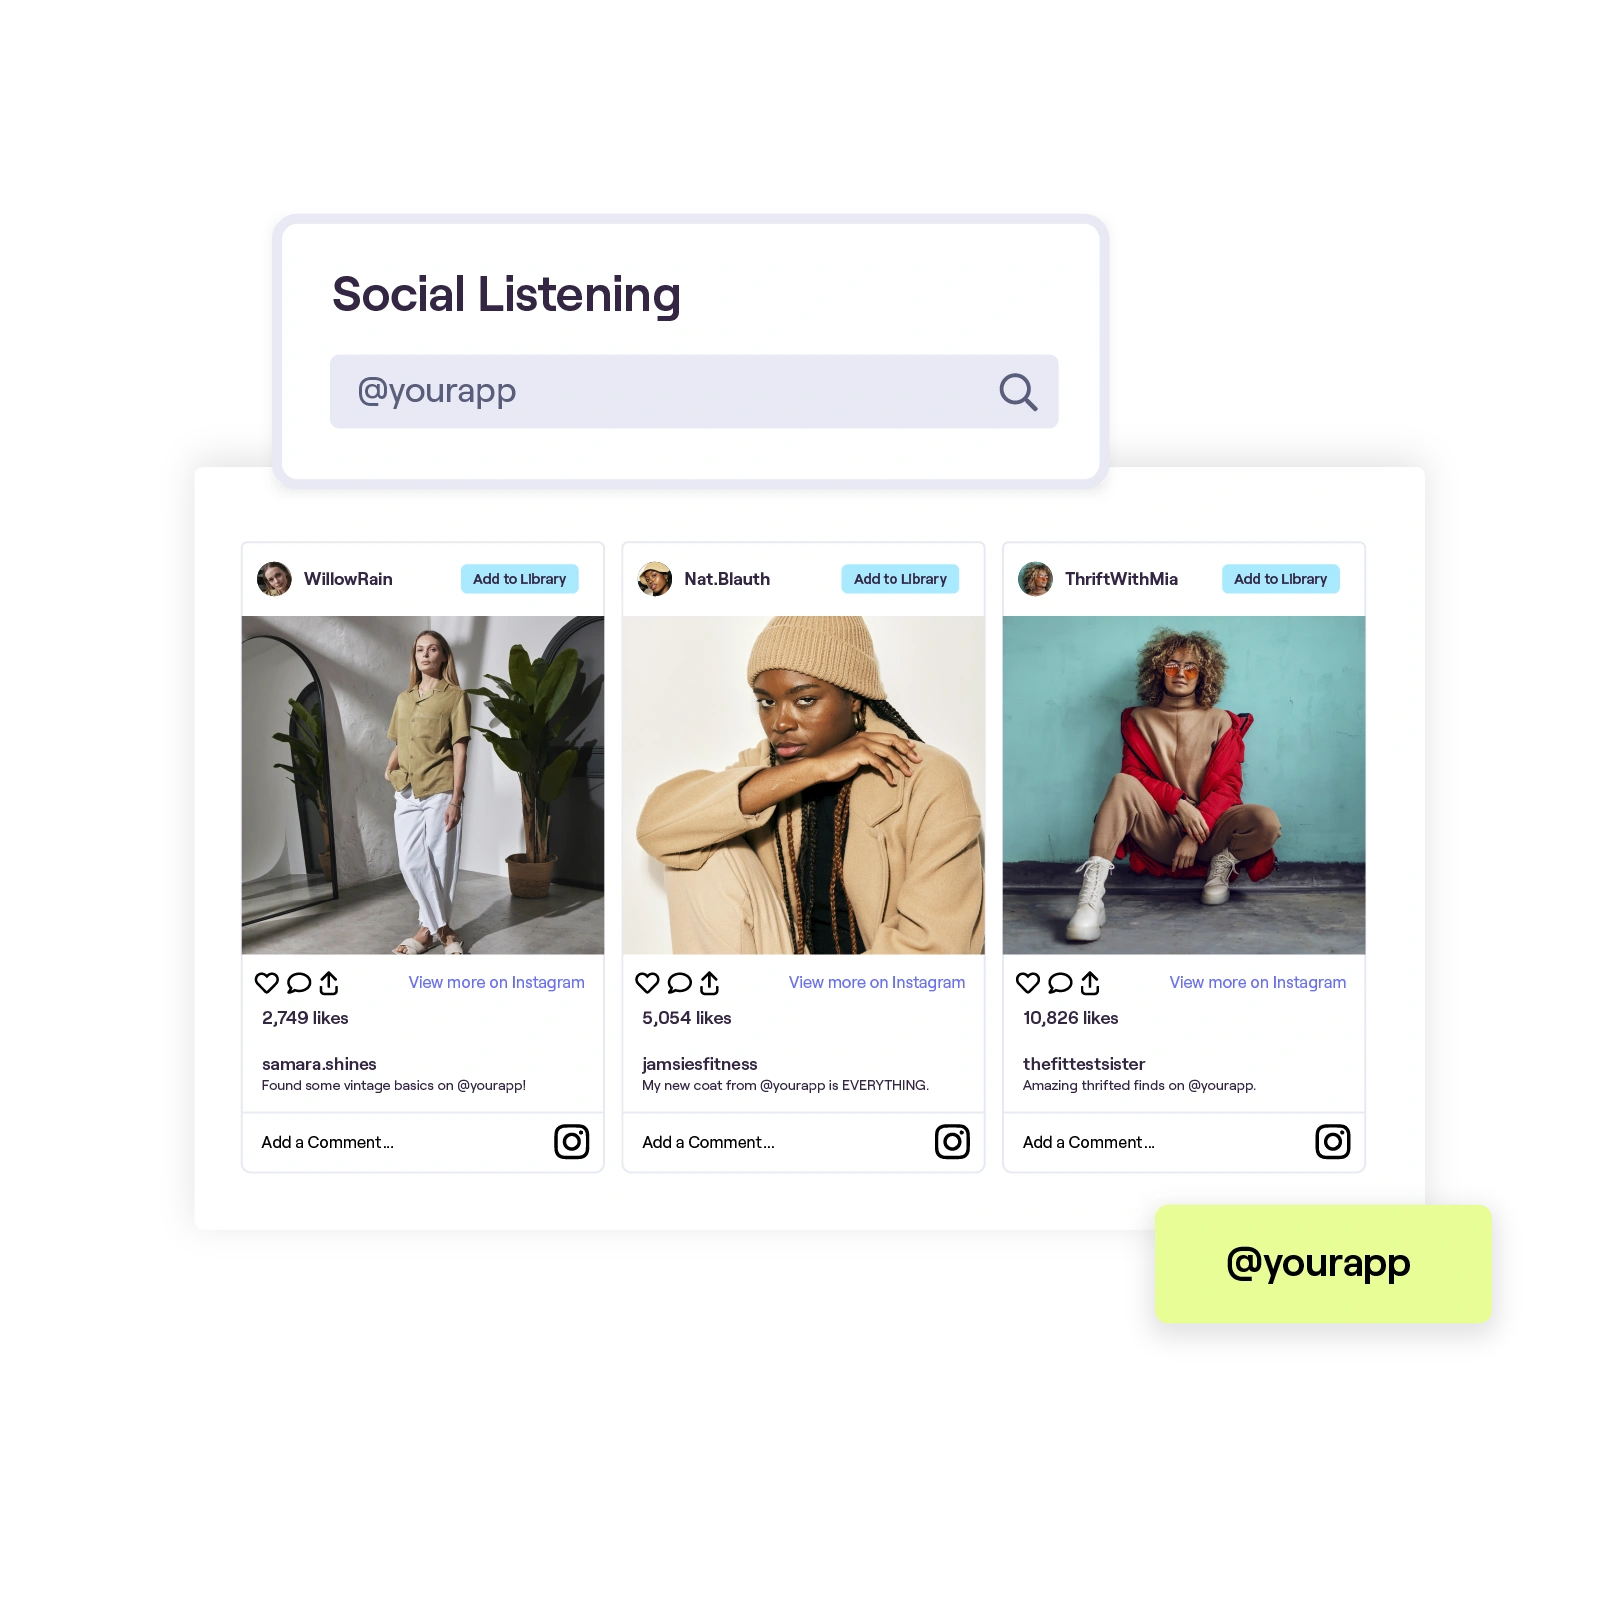 Stylized image of three social media posts below a Social Listening search bar